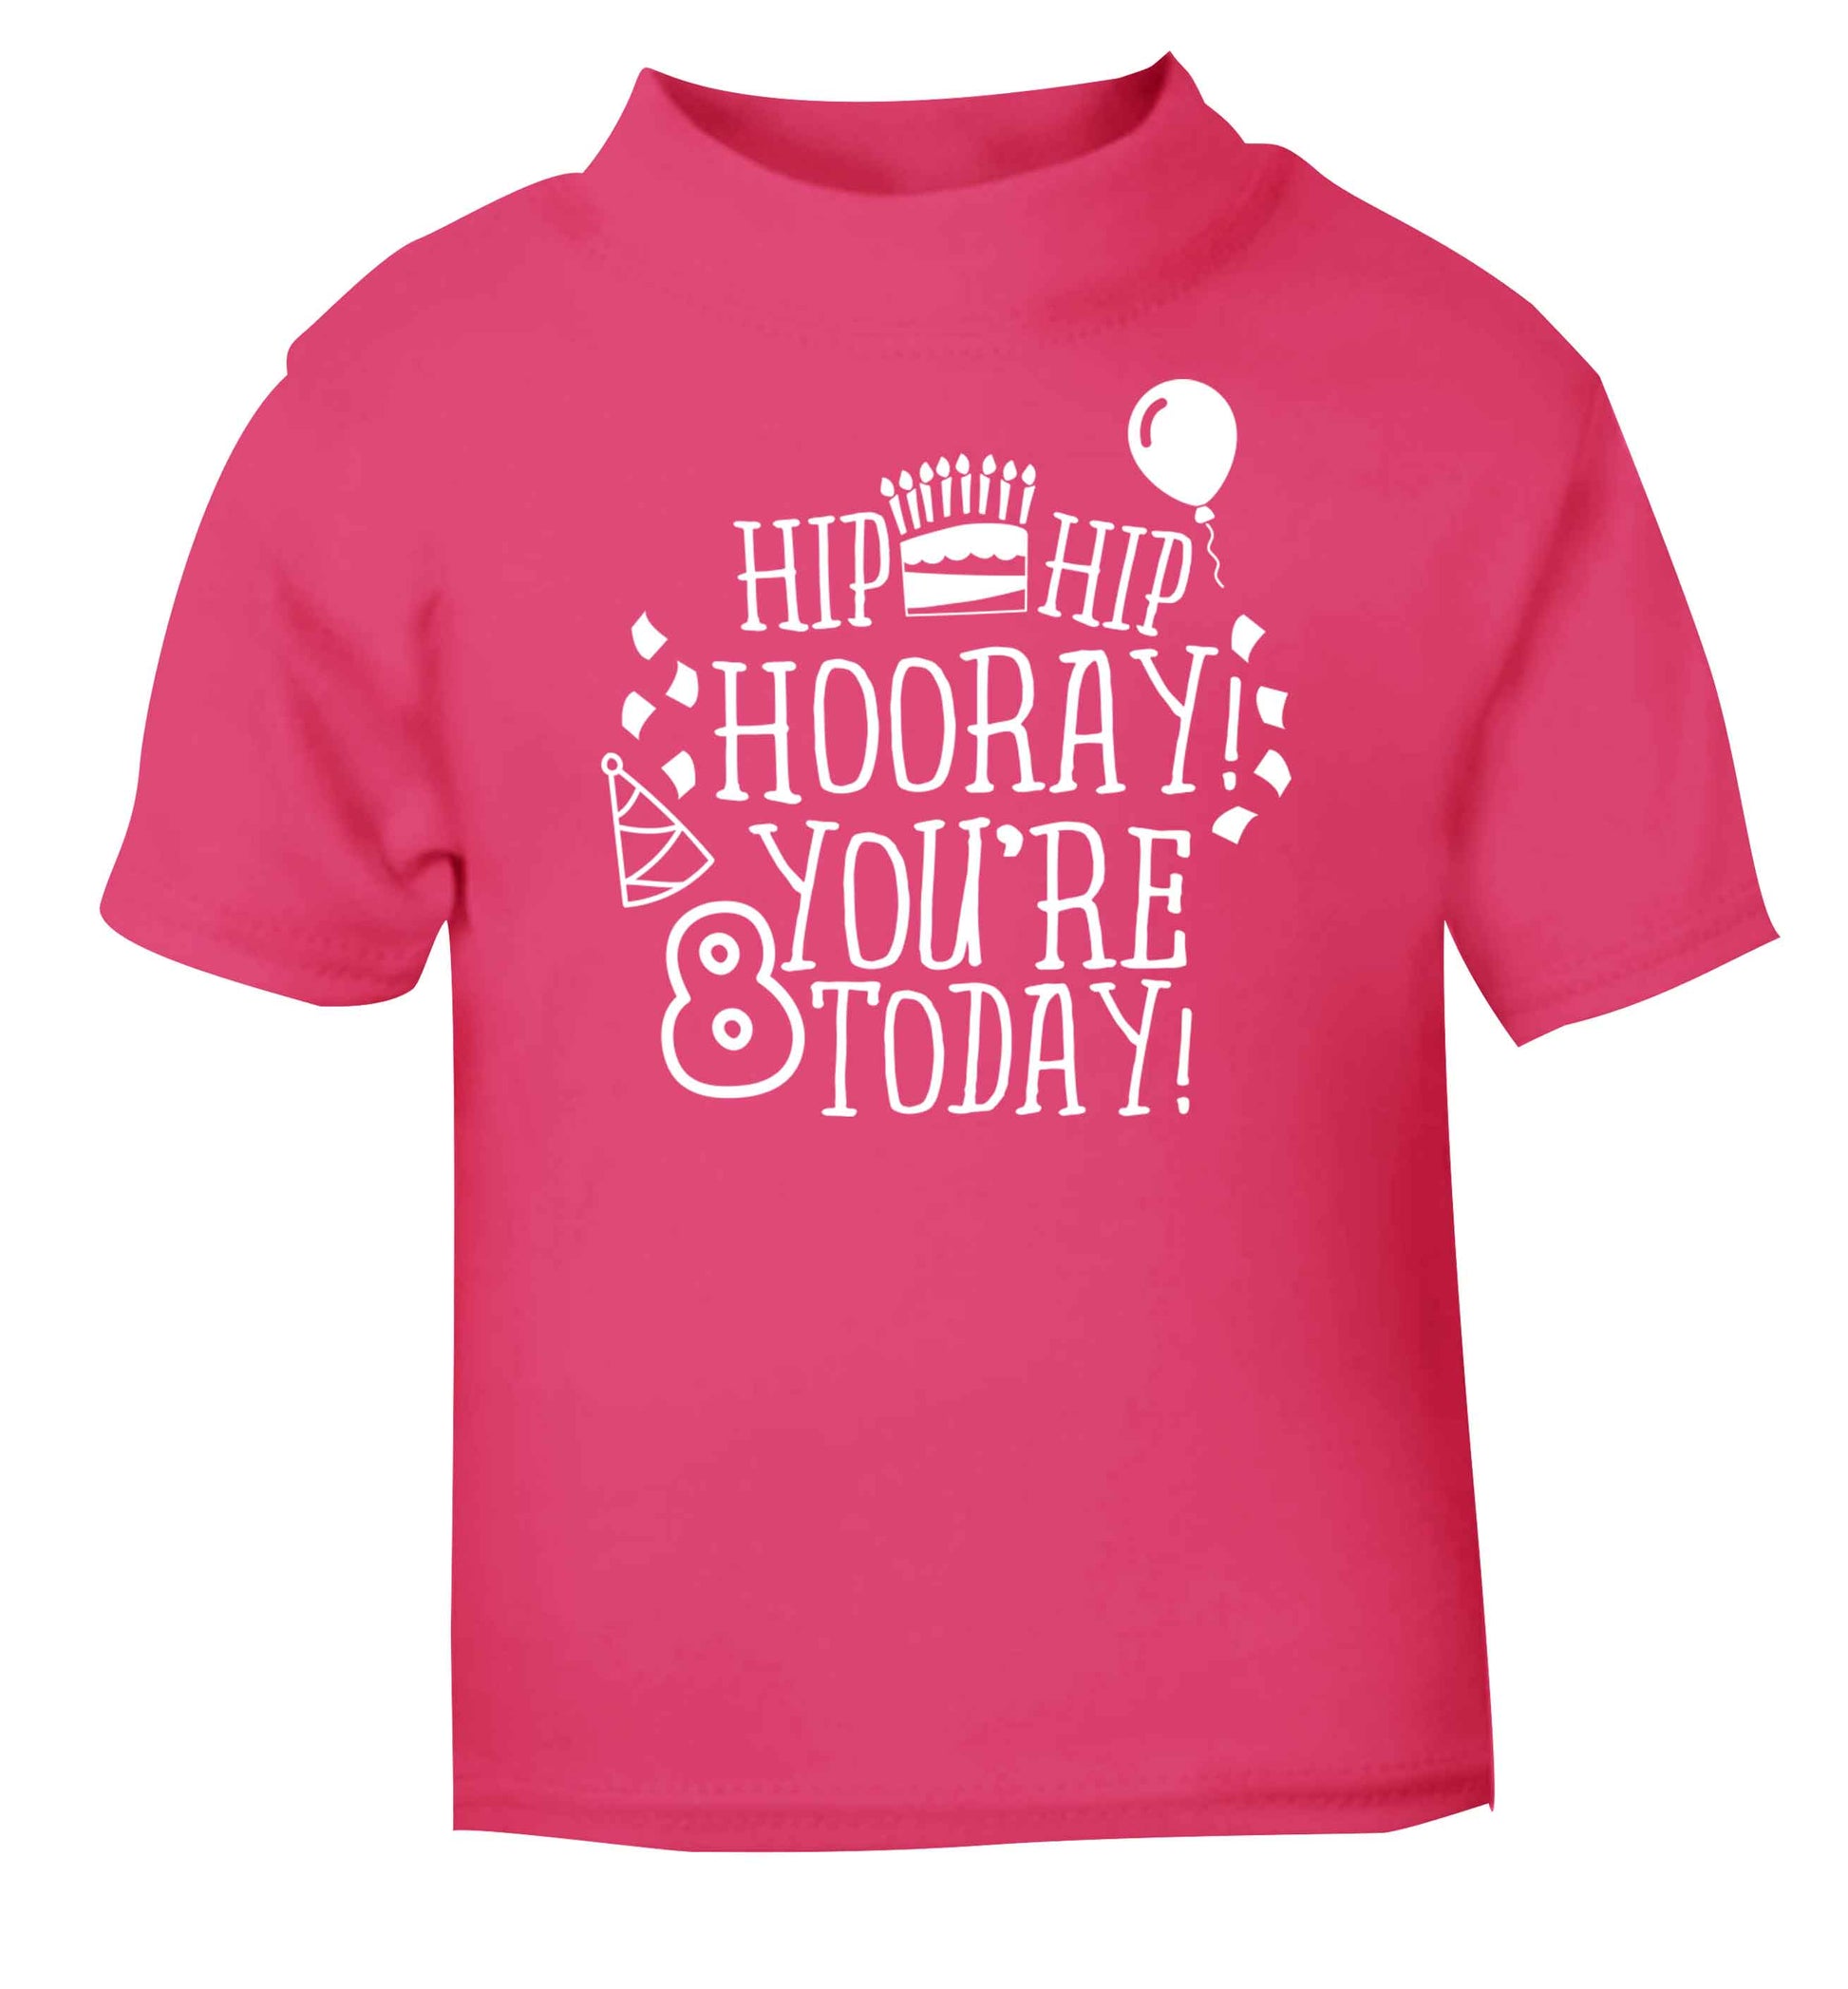 Hip hip hooray you're 8 today! pink baby toddler Tshirt 2 Years